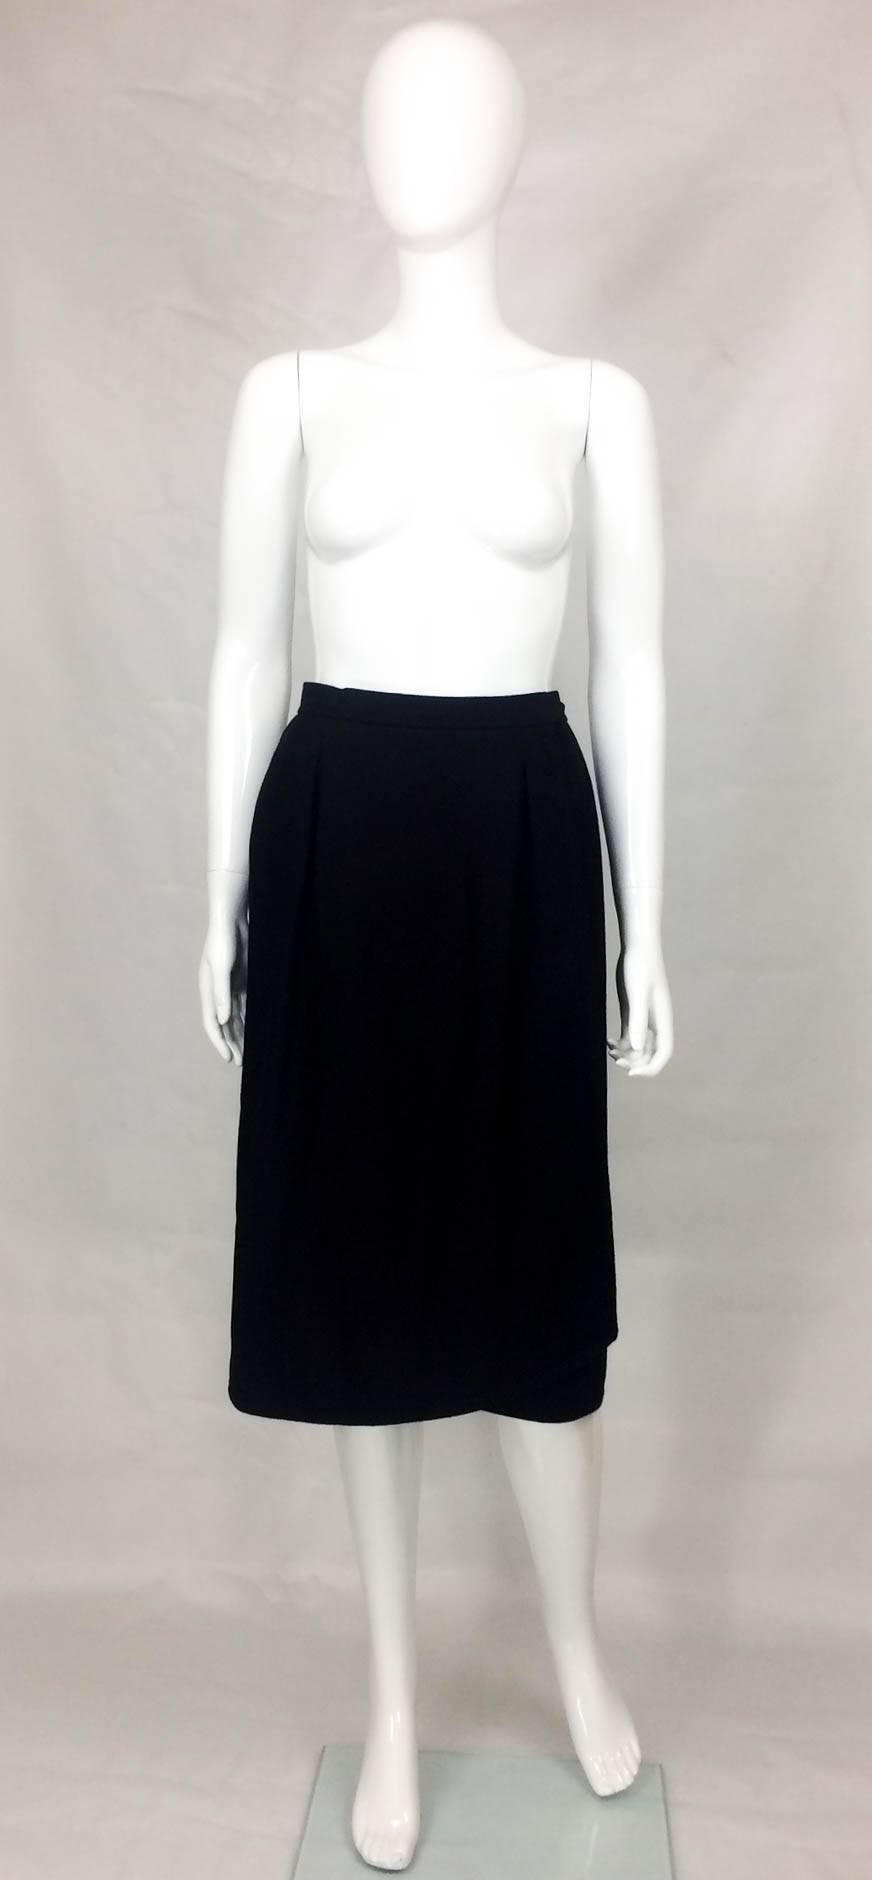 Very Smart Yves Saint Laurent Wool Skirt. This chic wrap skirt is made in the very soft black wool. It features 2 side-pockets. Midi in length, this skirt is fully lined. This is an extremely versatile and elegant piece.

Designer/Label: Yves